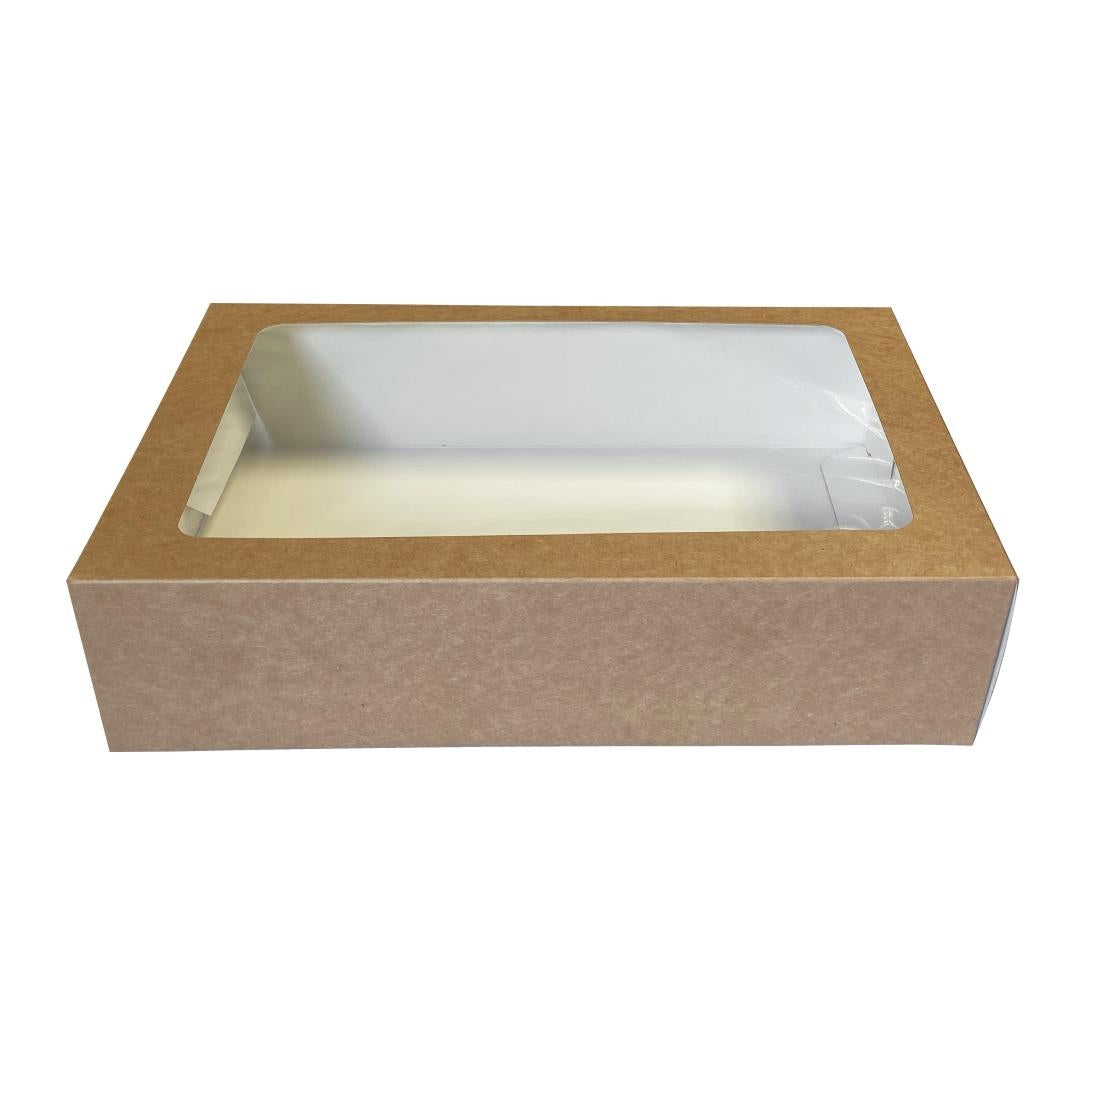 FT672 Fiesta Recyclable Platter Box with PET Window (Pack of 25) JD Catering Equipment Solutions Ltd